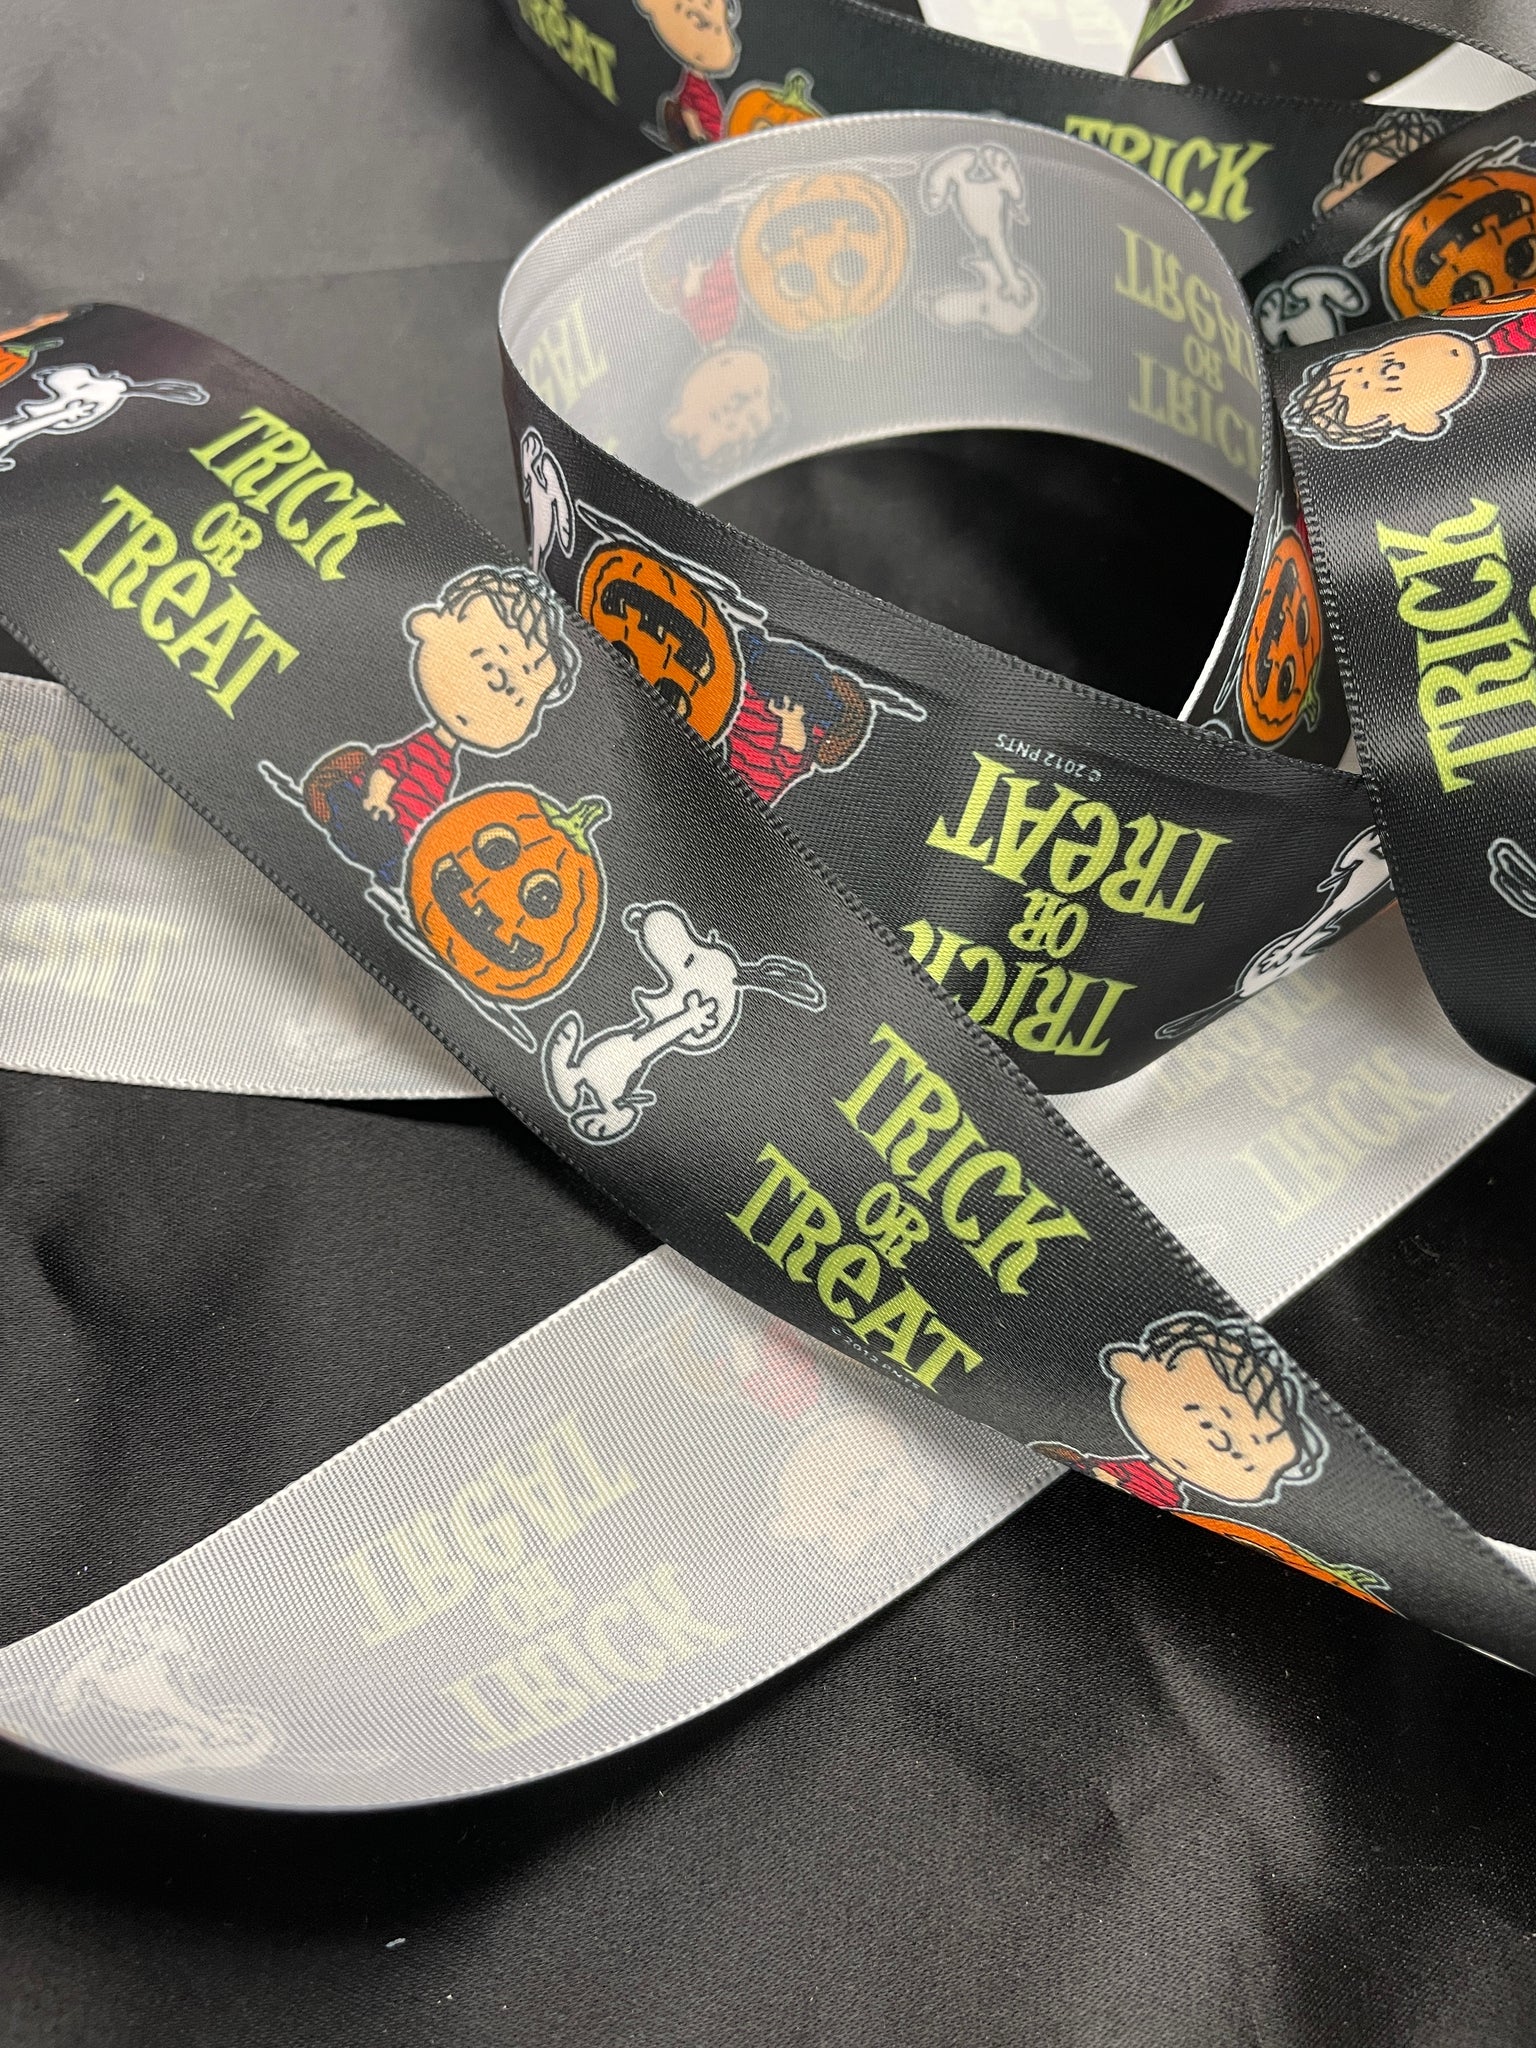 2012 3 YD Polyester Printed Satin Ribbon - Black with "Trick or Treat" and Peanuts Characters